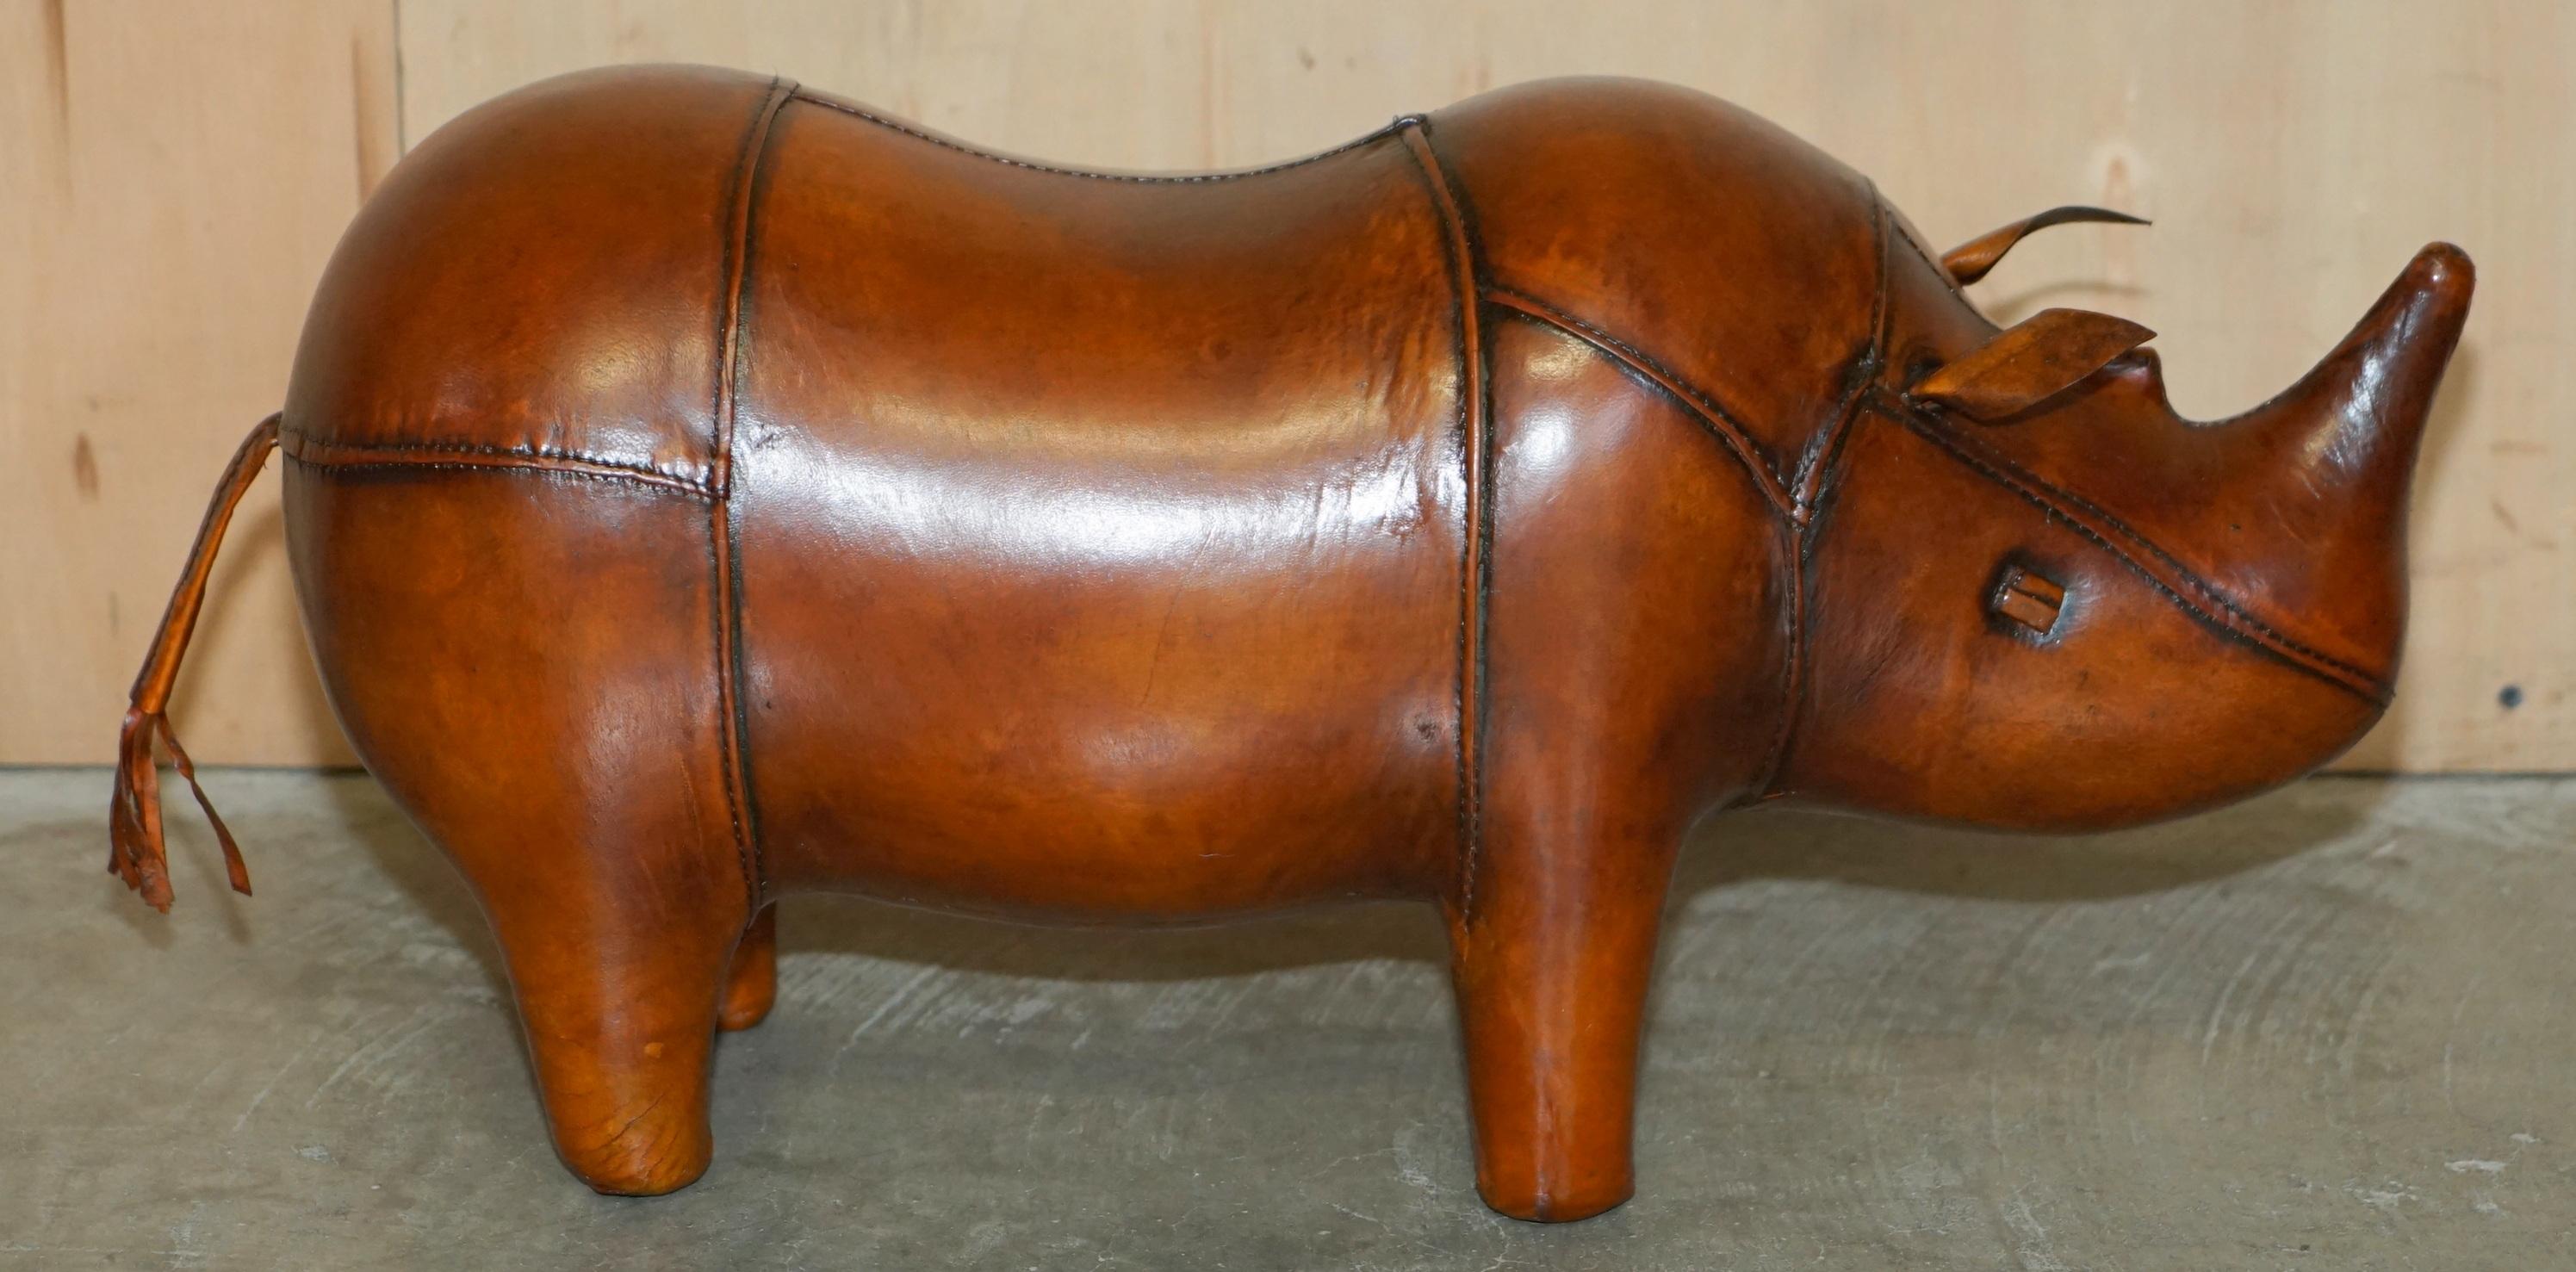 Royal House Antiques

Royal House Antiques is delighted to offer for sale this absolutely sublime new old stock original Liberty’s London Omersa style brown leather hand dyed Rhino footstool

I have four of these in stock, this listing is for 1